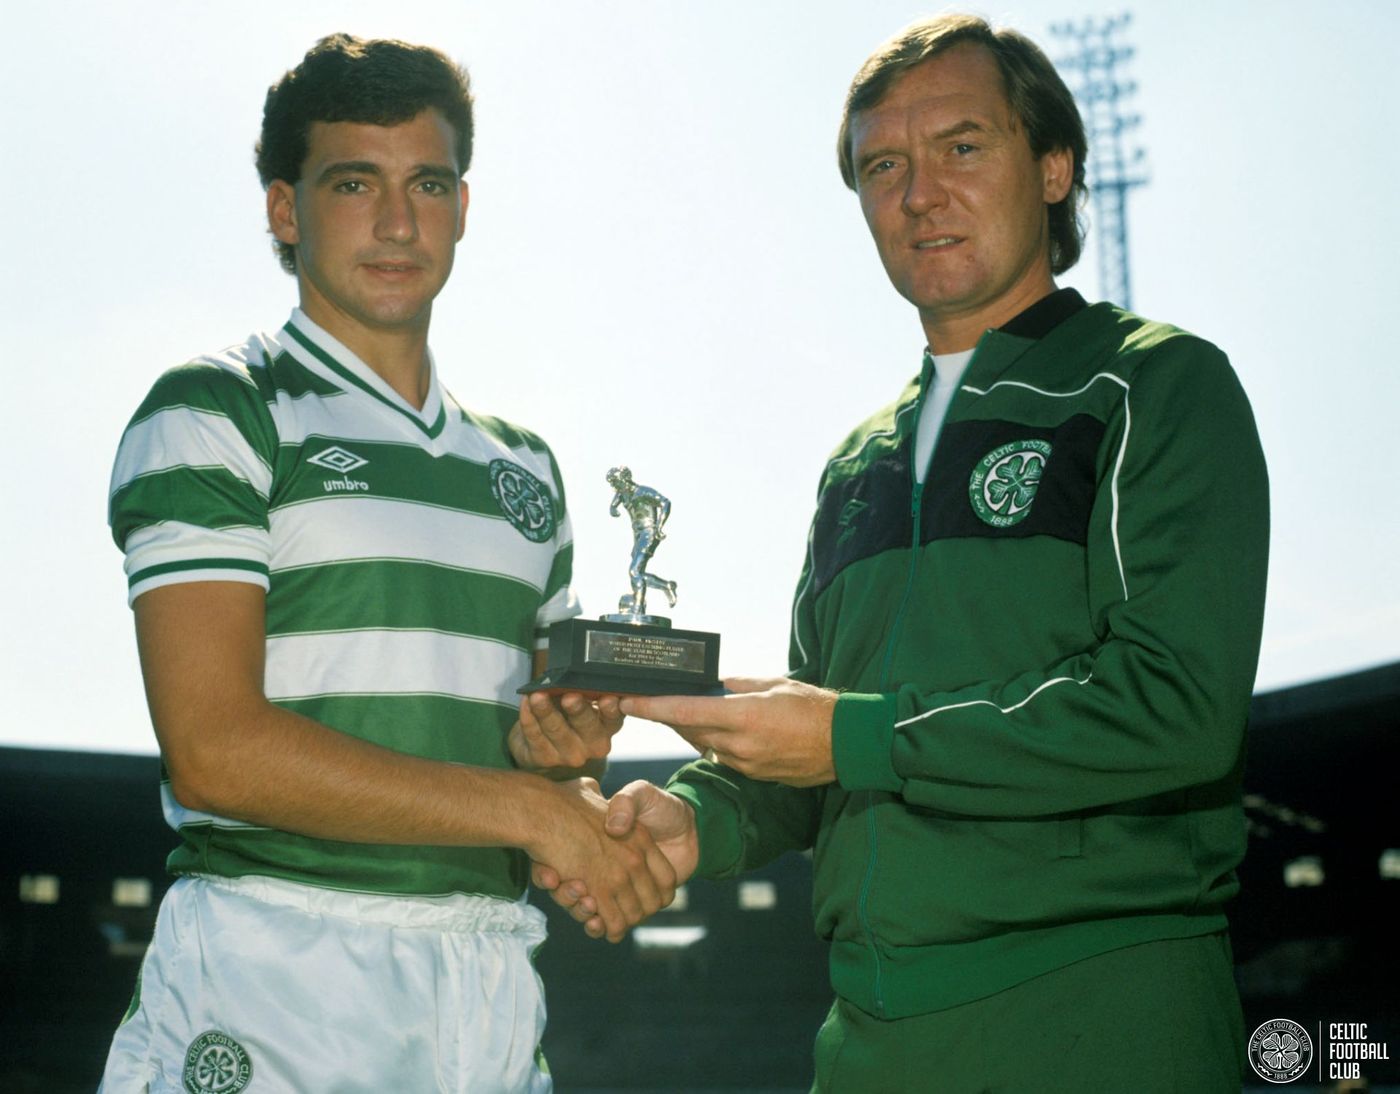 Celtic View series: The 600 Club Part 6: Paul McStay